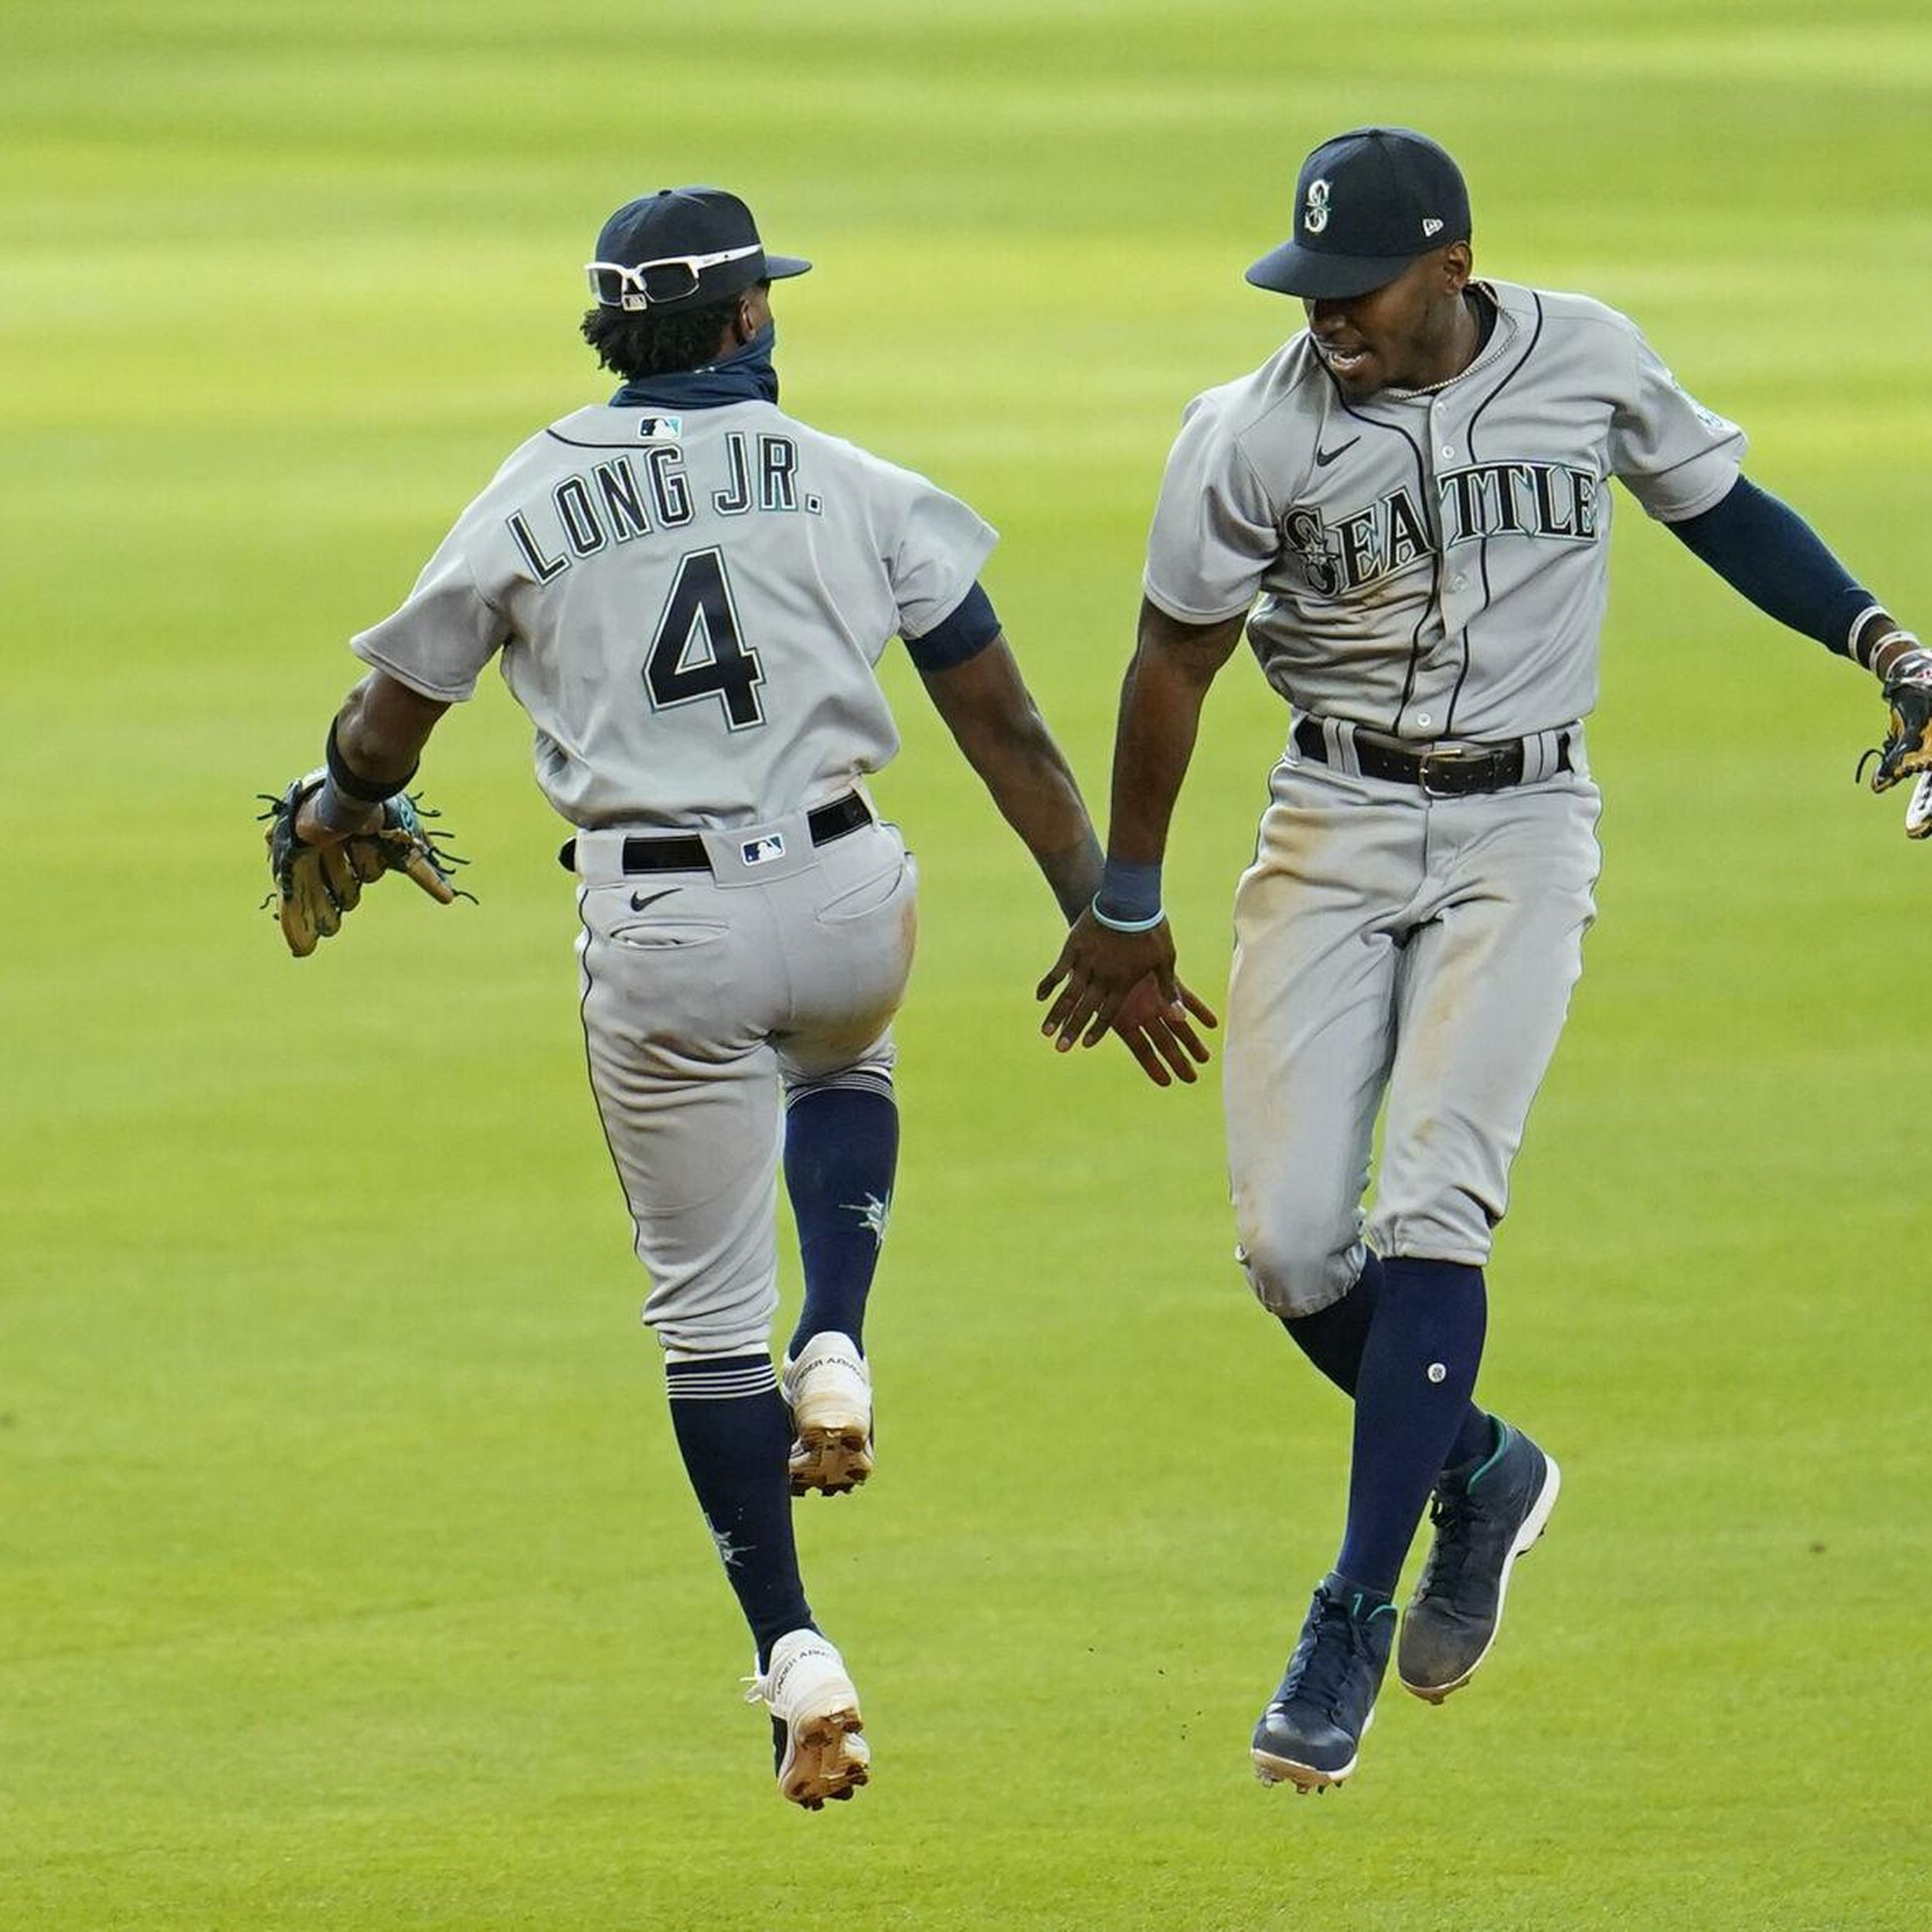 Kyle Lewis has 2 RBIs in 8th to lead Mariners over Astros 7-6